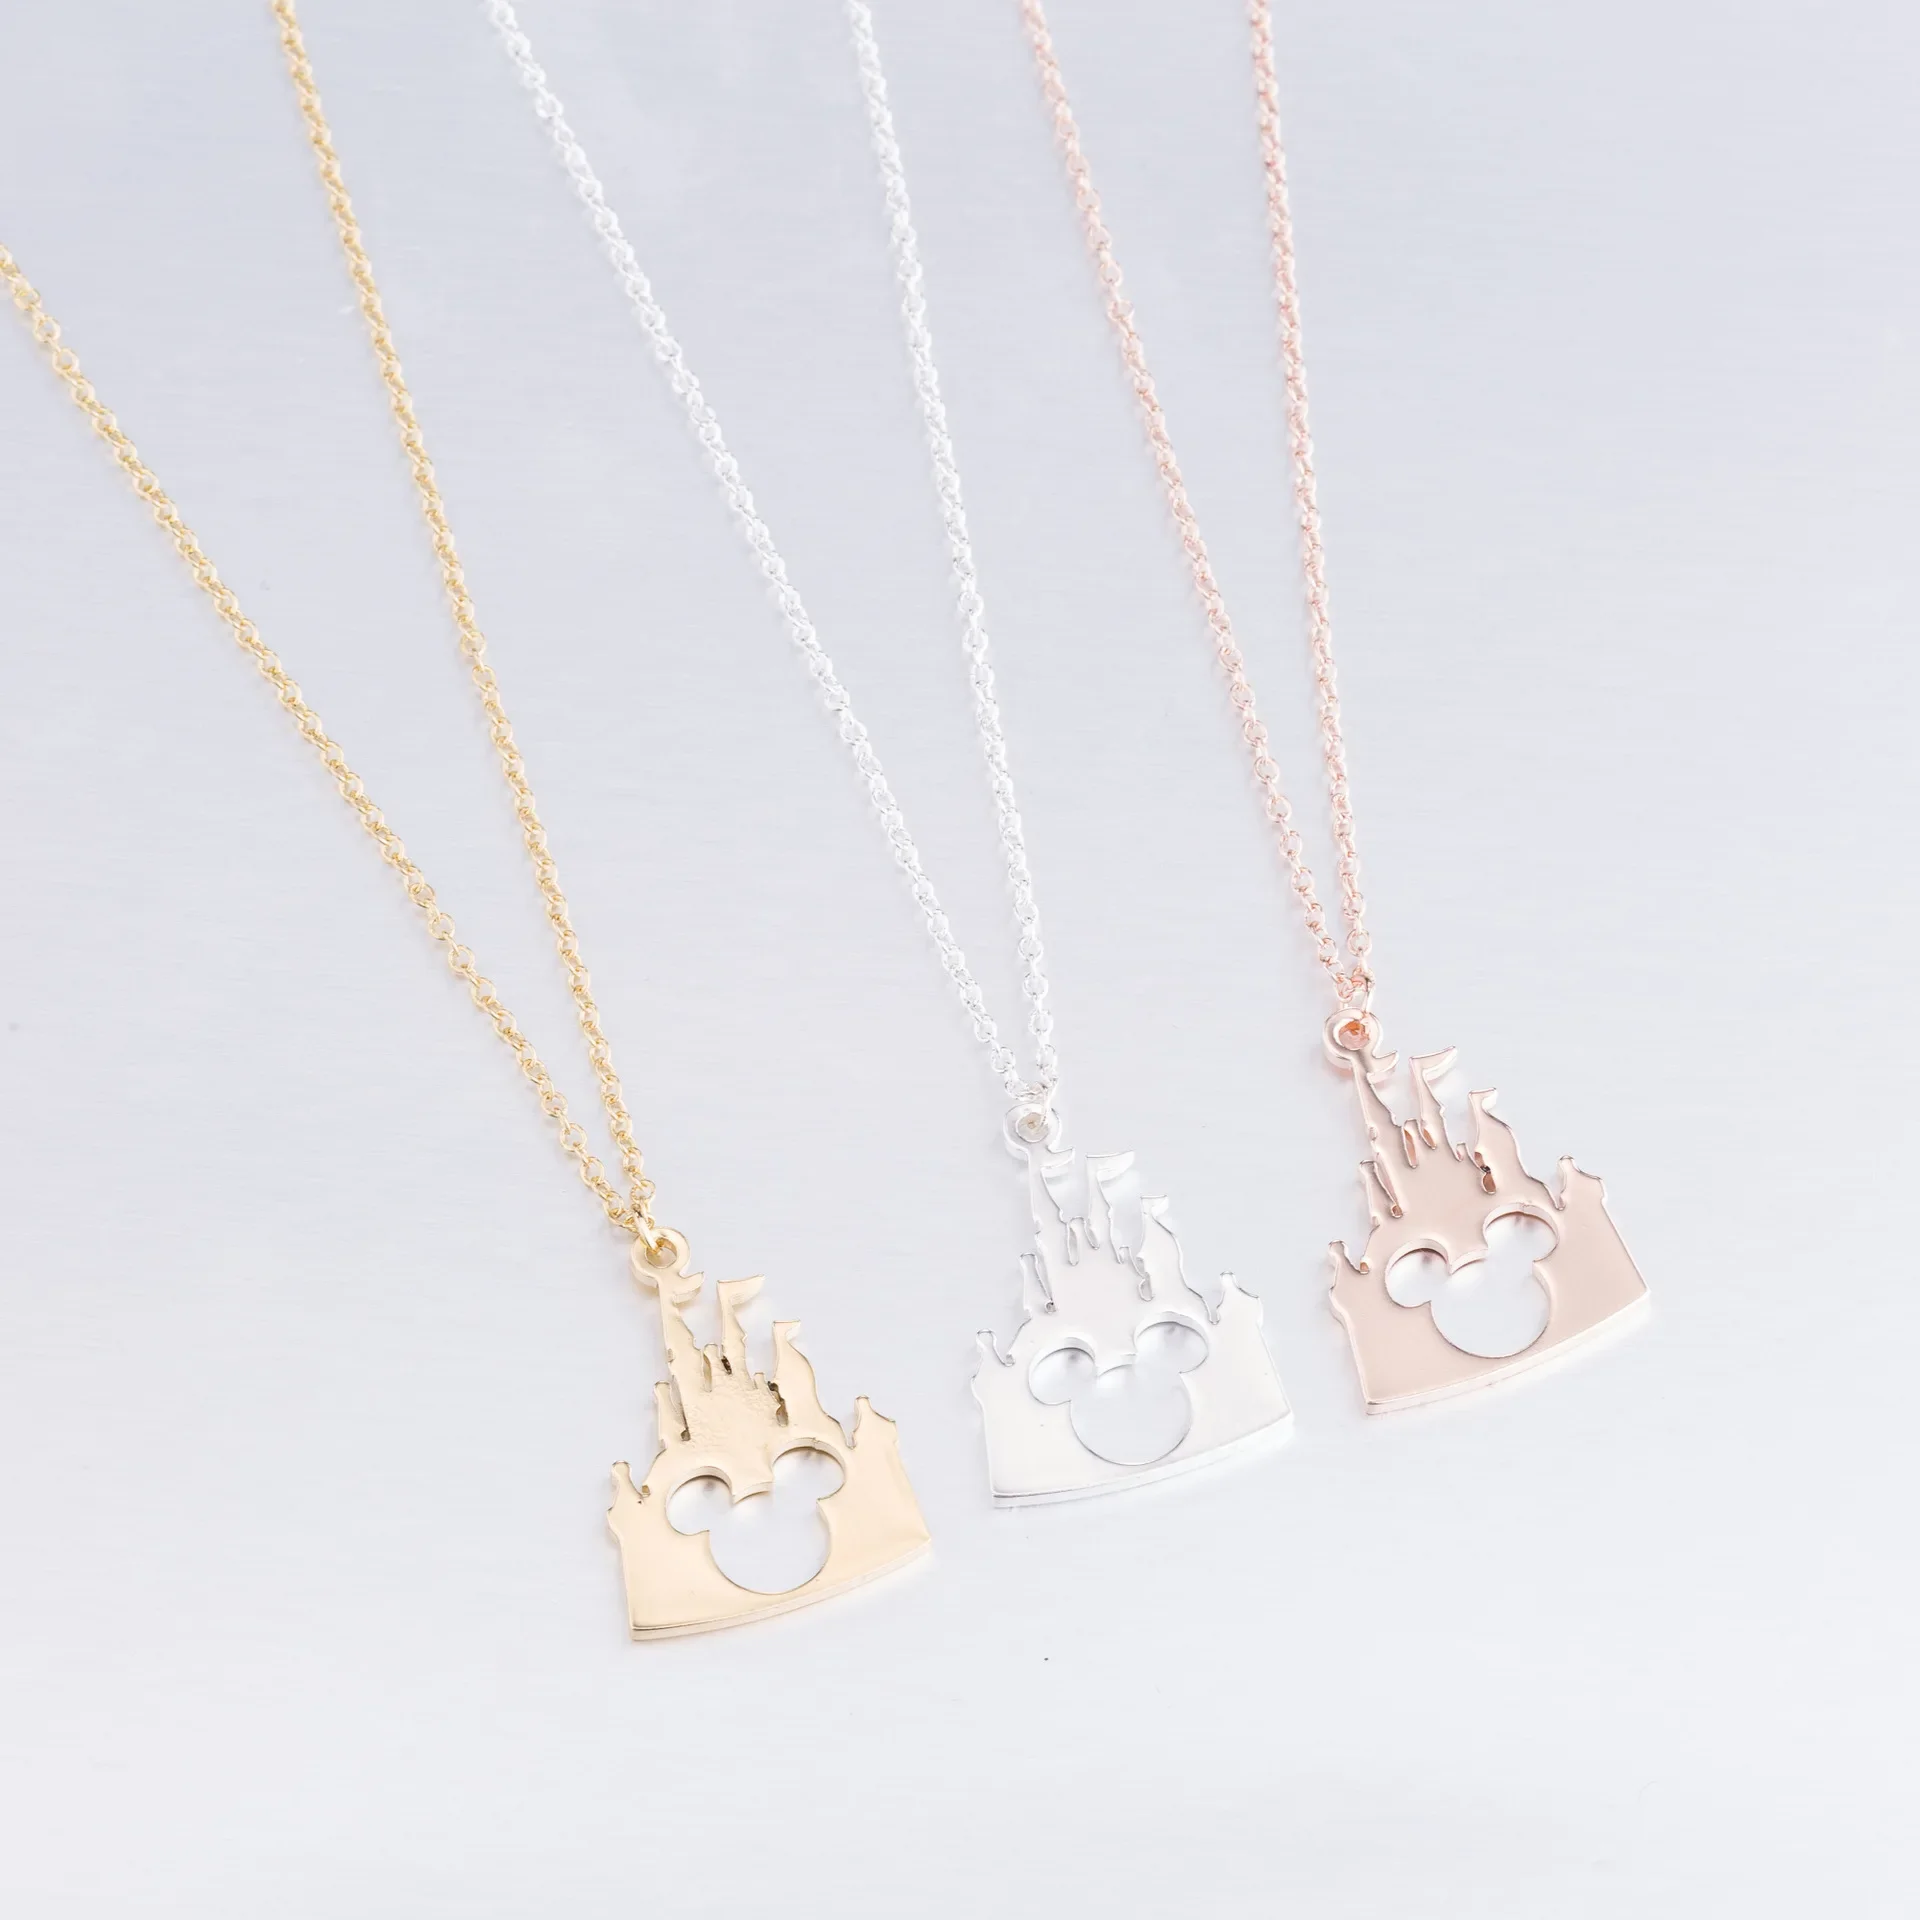 Disney Mickey Mouse Cartoon Castle Mickey Head Pendant Necklace Castle Animal Jewelry for Women Necklaces Fashion Accessories